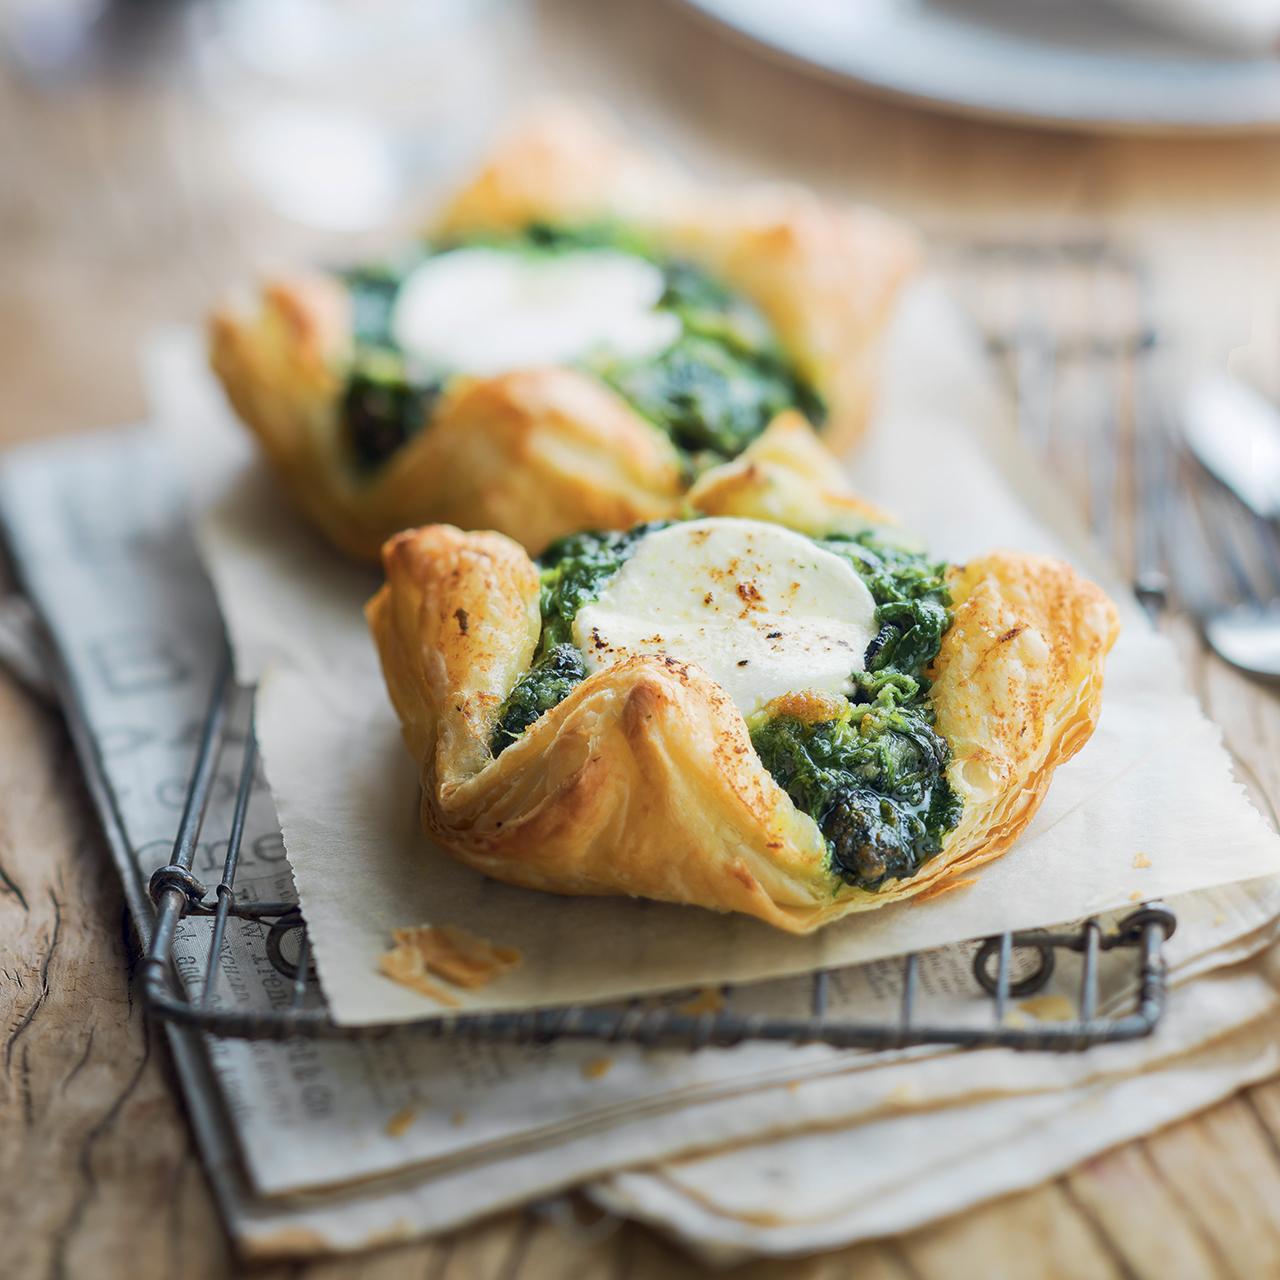 Picard Goats Cheese & Spinach Pastries 4 x 110g